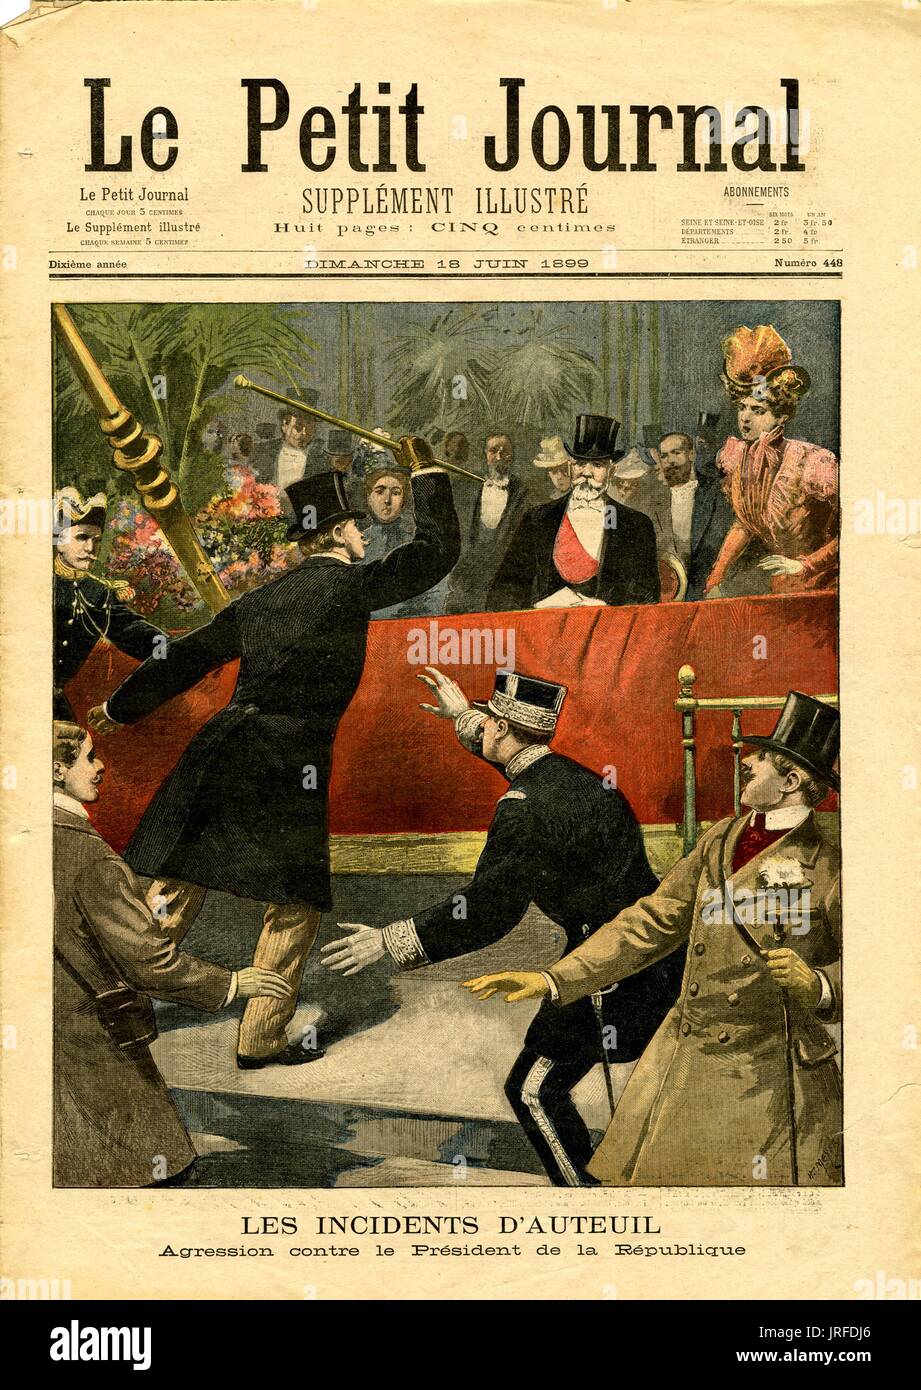 Le Petit Journal Cover titled 'Les Incidents D'Auteuil, Agression contre President de la Republique', one man showing aggression towards the president of the Republic by swinging a cane at him, men are trying to stop him, 1899. Stock Photo